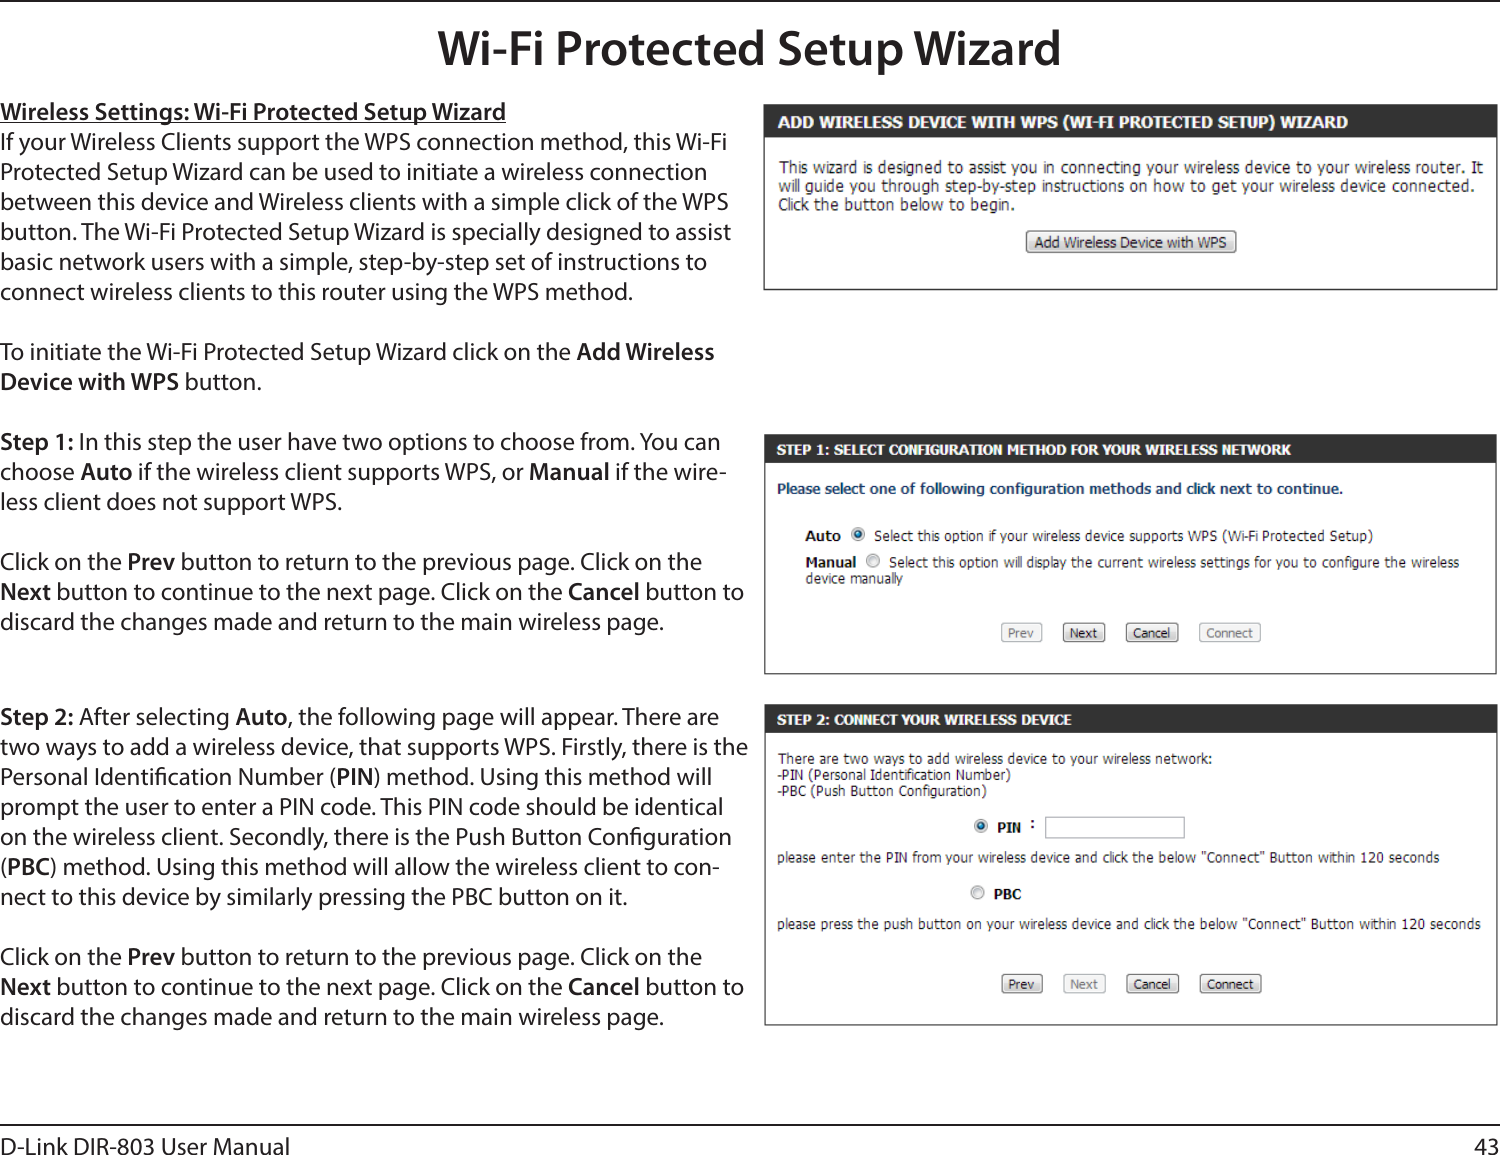 43D-Link DIR-803 User ManualWireless Settings: Wi-Fi Protected Setup WizardIf your Wireless Clients support the WPS connection method, this Wi-Fi Protected Setup Wizard can be used to initiate a wireless connection between this device and Wireless clients with a simple click of the WPS button. The Wi-Fi Protected Setup Wizard is specially designed to assist basic network users with a simple, step-by-step set of instructions to connect wireless clients to this router using the WPS method.To initiate the Wi-Fi Protected Setup Wizard click on the Add Wireless Device with WPS button.Step 1: In this step the user have two options to choose from. You can choose Auto if the wireless client supports WPS, or Manual if the wire-less client does not support WPS.Click on the Prev button to return to the previous page. Click on the Next button to continue to the next page. Click on the Cancel button to discard the changes made and return to the main wireless page.Step 2: After selecting Auto, the following page will appear. There are two ways to add a wireless device, that supports WPS. Firstly, there is the Personal Identication Number (PIN) method. Using this method will prompt the user to enter a PIN code. This PIN code should be identical on the wireless client. Secondly, there is the Push Button Conguration (PBC) method. Using this method will allow the wireless client to con-nect to this device by similarly pressing the PBC button on it.Click on the Prev button to return to the previous page. Click on the Next button to continue to the next page. Click on the Cancel button to discard the changes made and return to the main wireless page.Wi-Fi Protected Setup Wizard